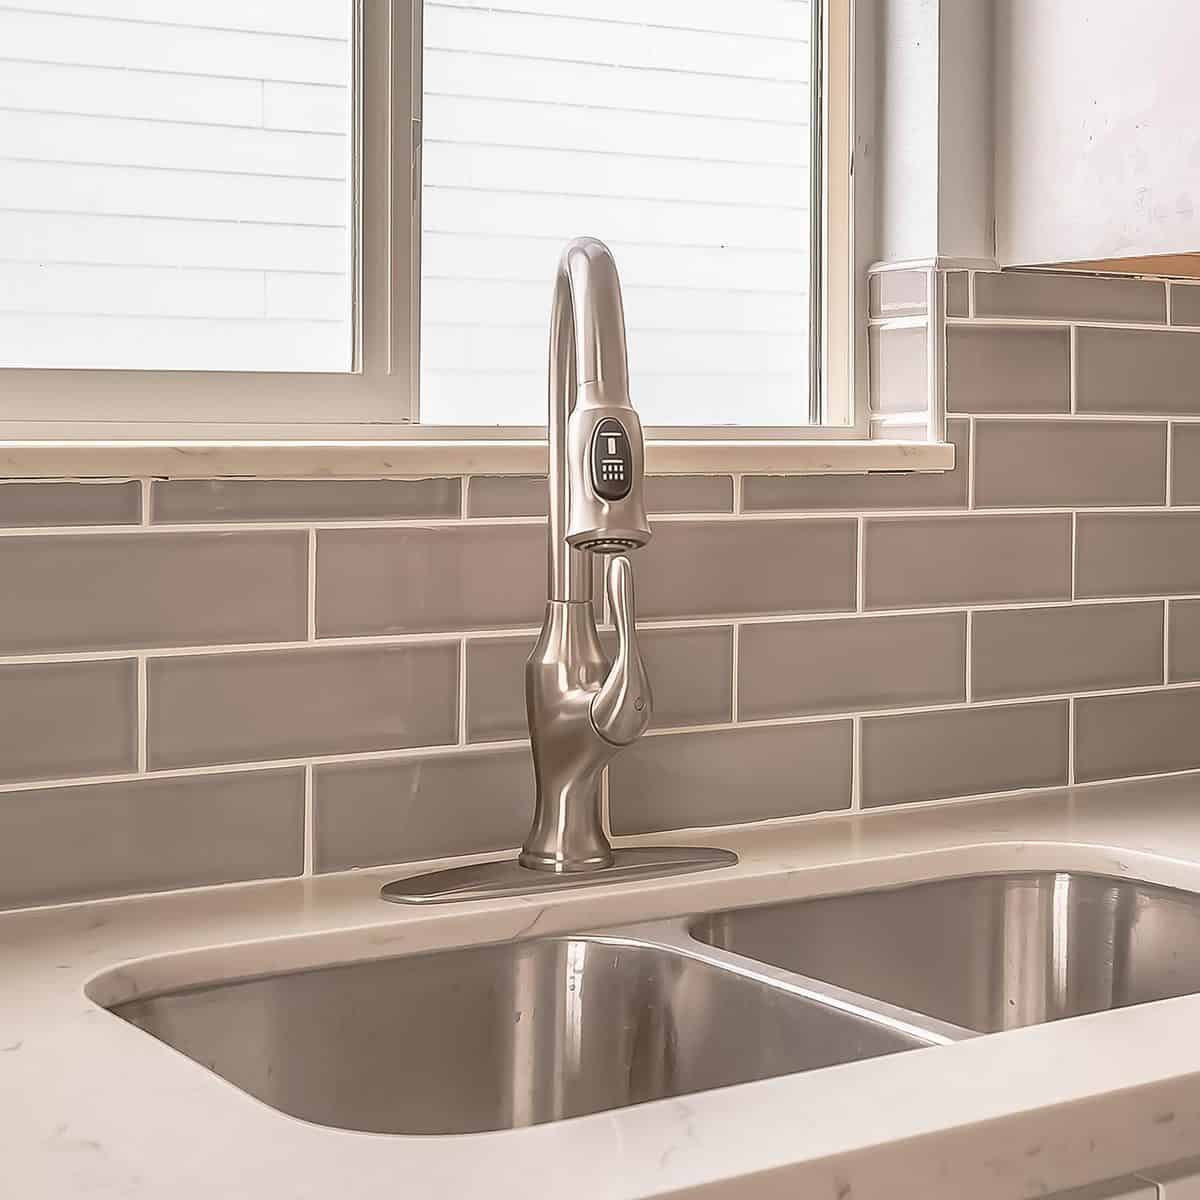 Square frame Undermount double bowl sink and faucet on the gleaming white kitchen countertop